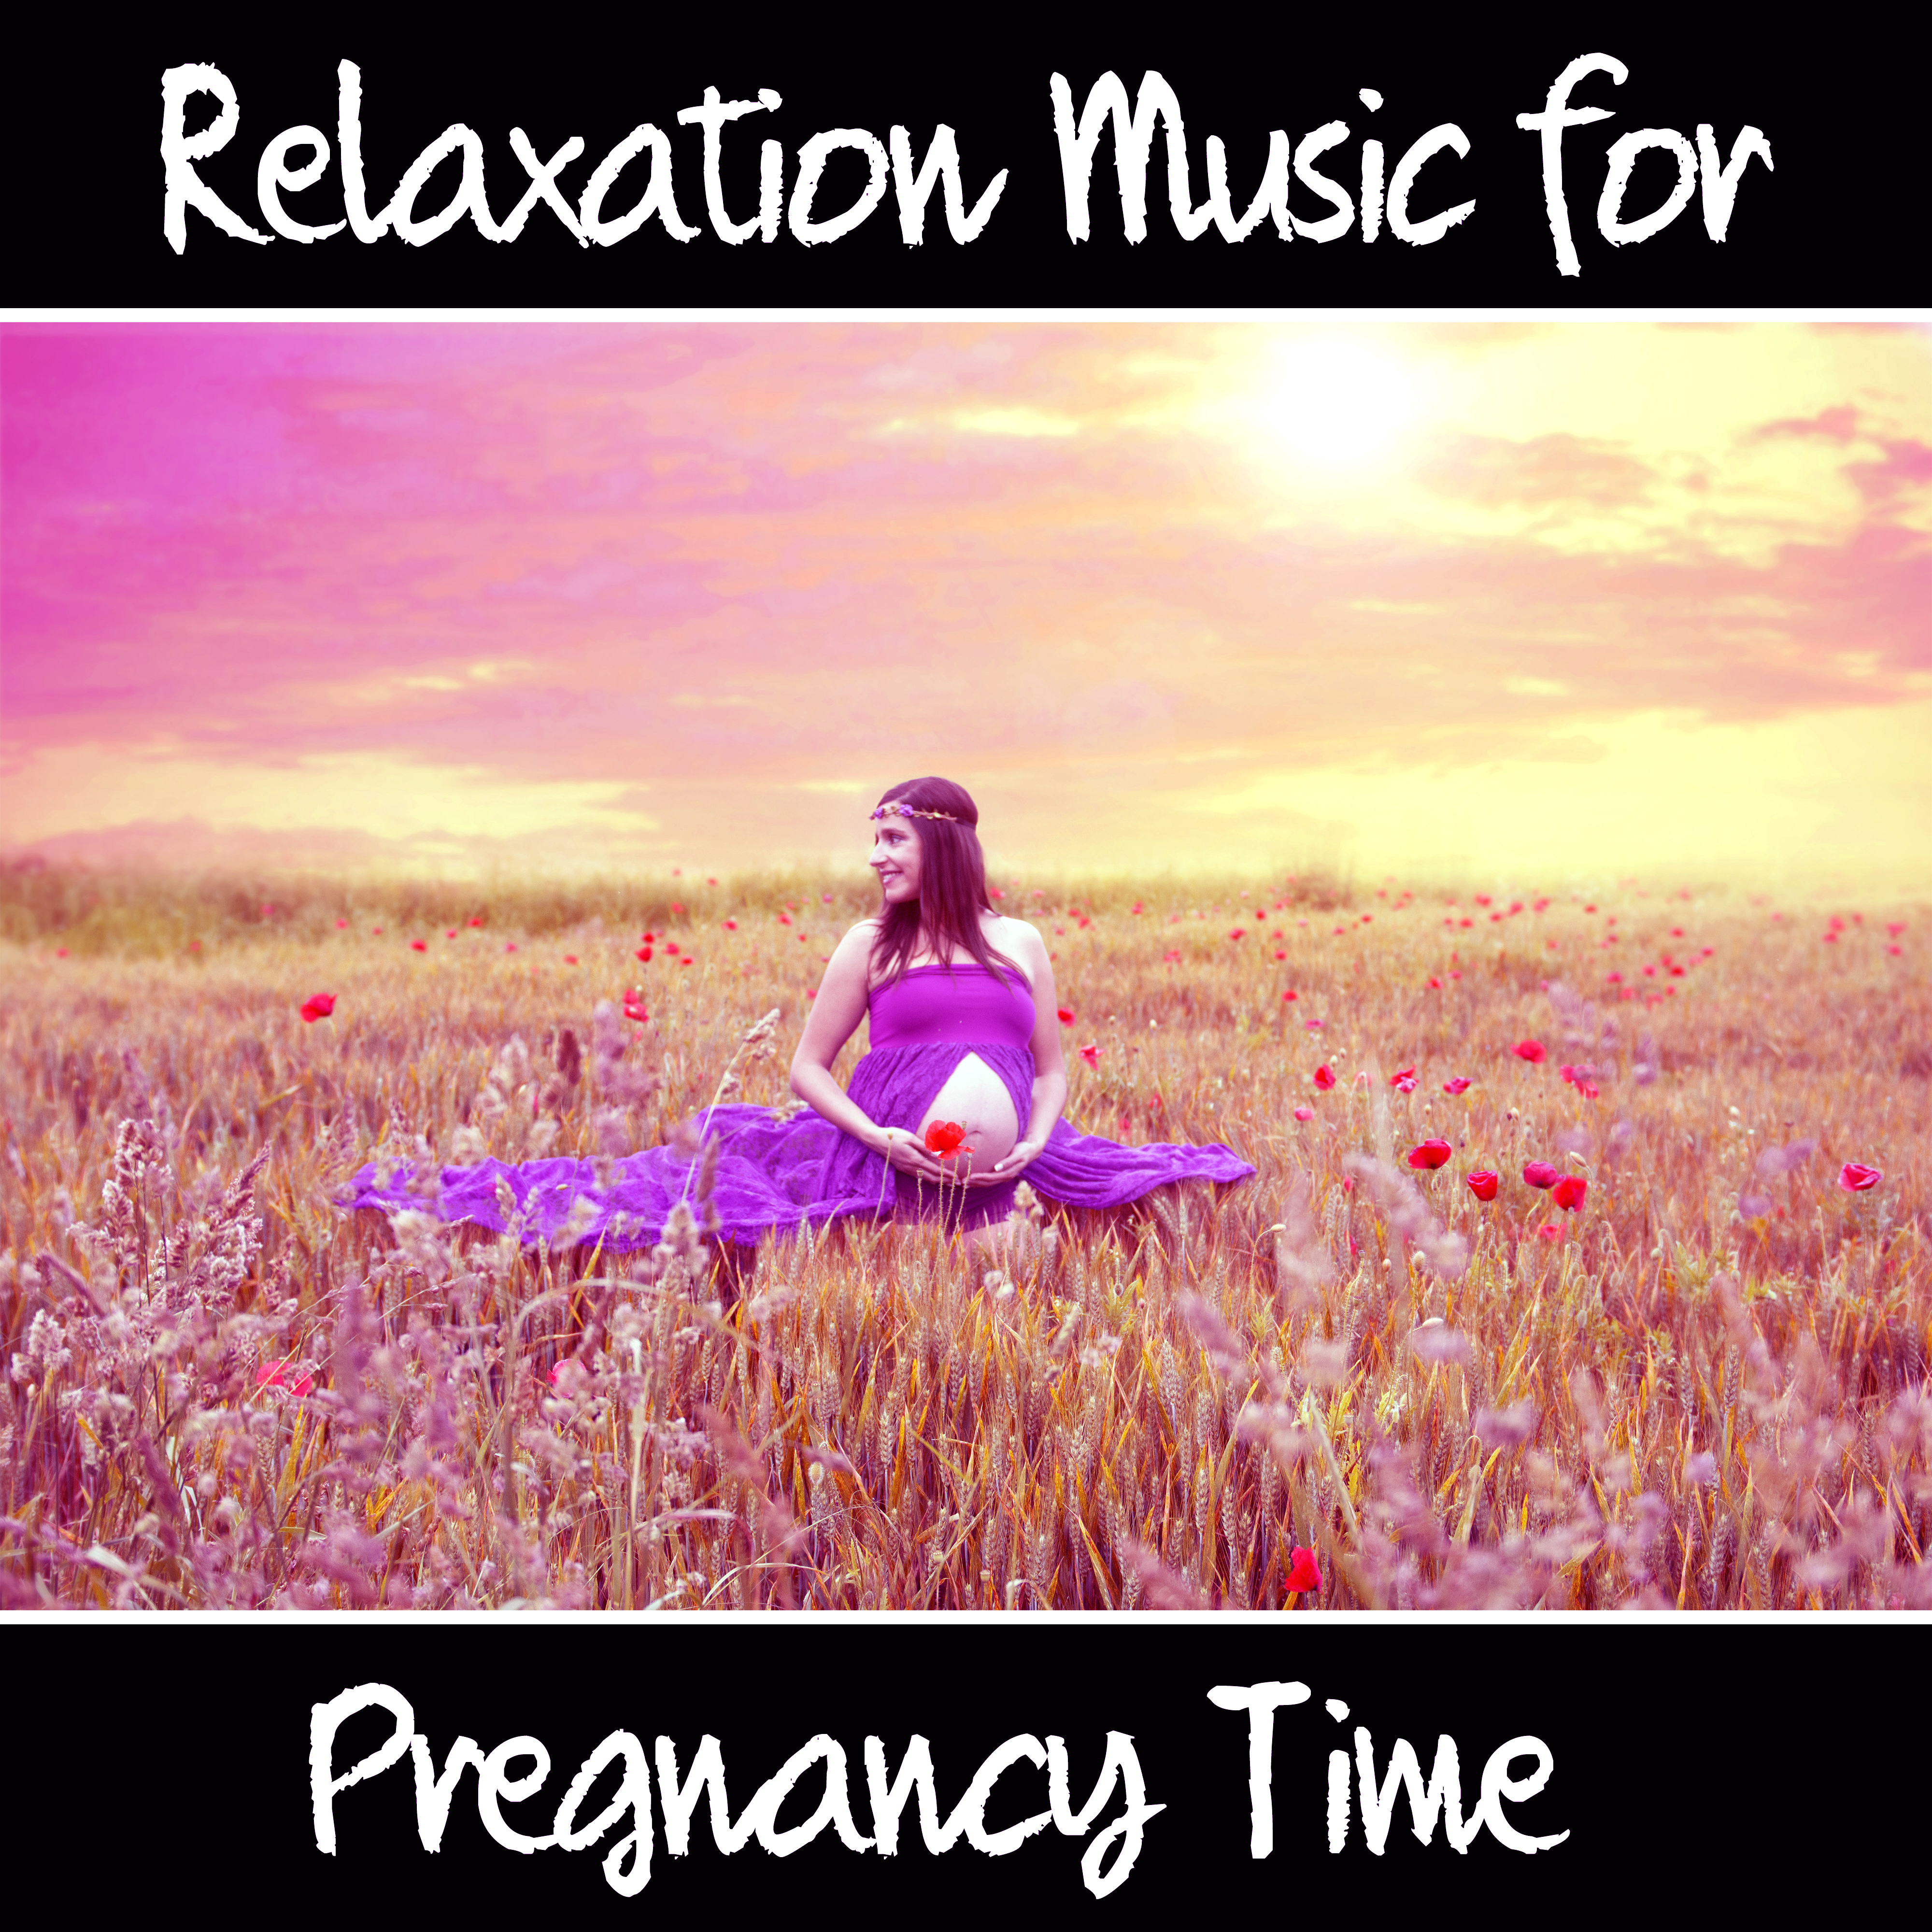 Relaxation Music for Pregnancy Time  Soothing Sounds of Nature for Relaxation in Pregnant, Yoga Music, Pregnancy Meditation, Prenatal Meditation